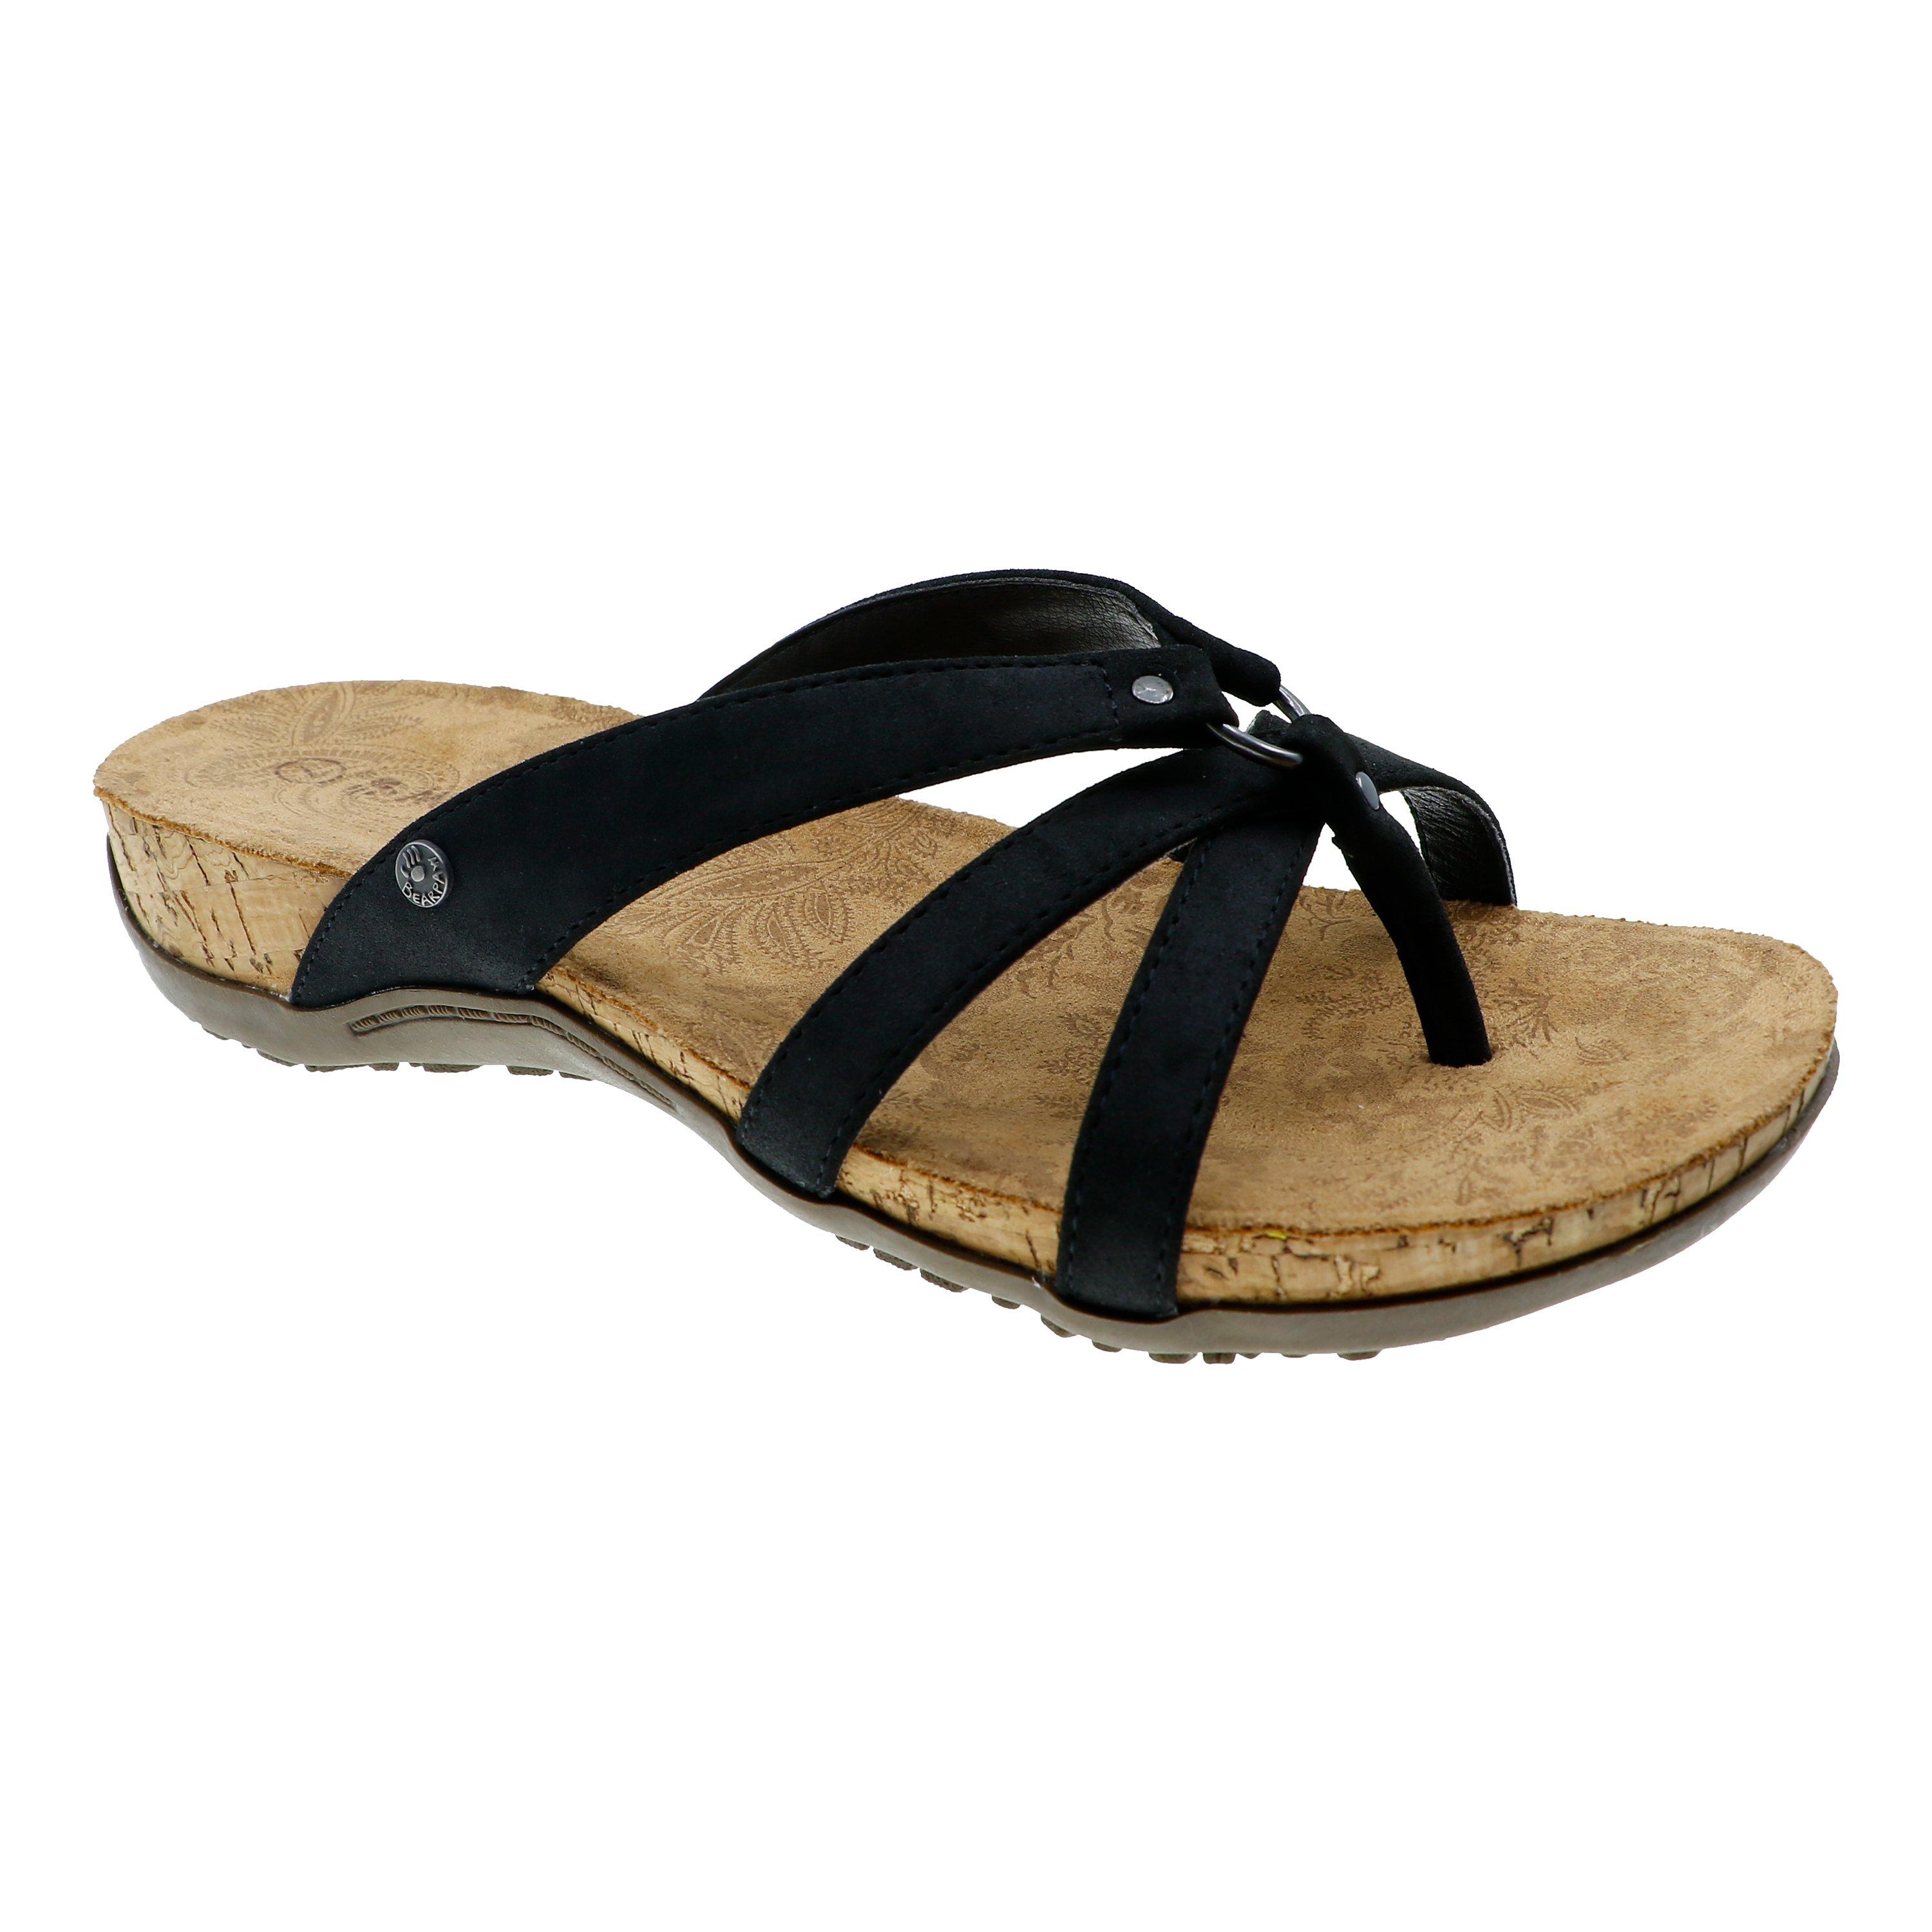 Womens Fawn Sandals